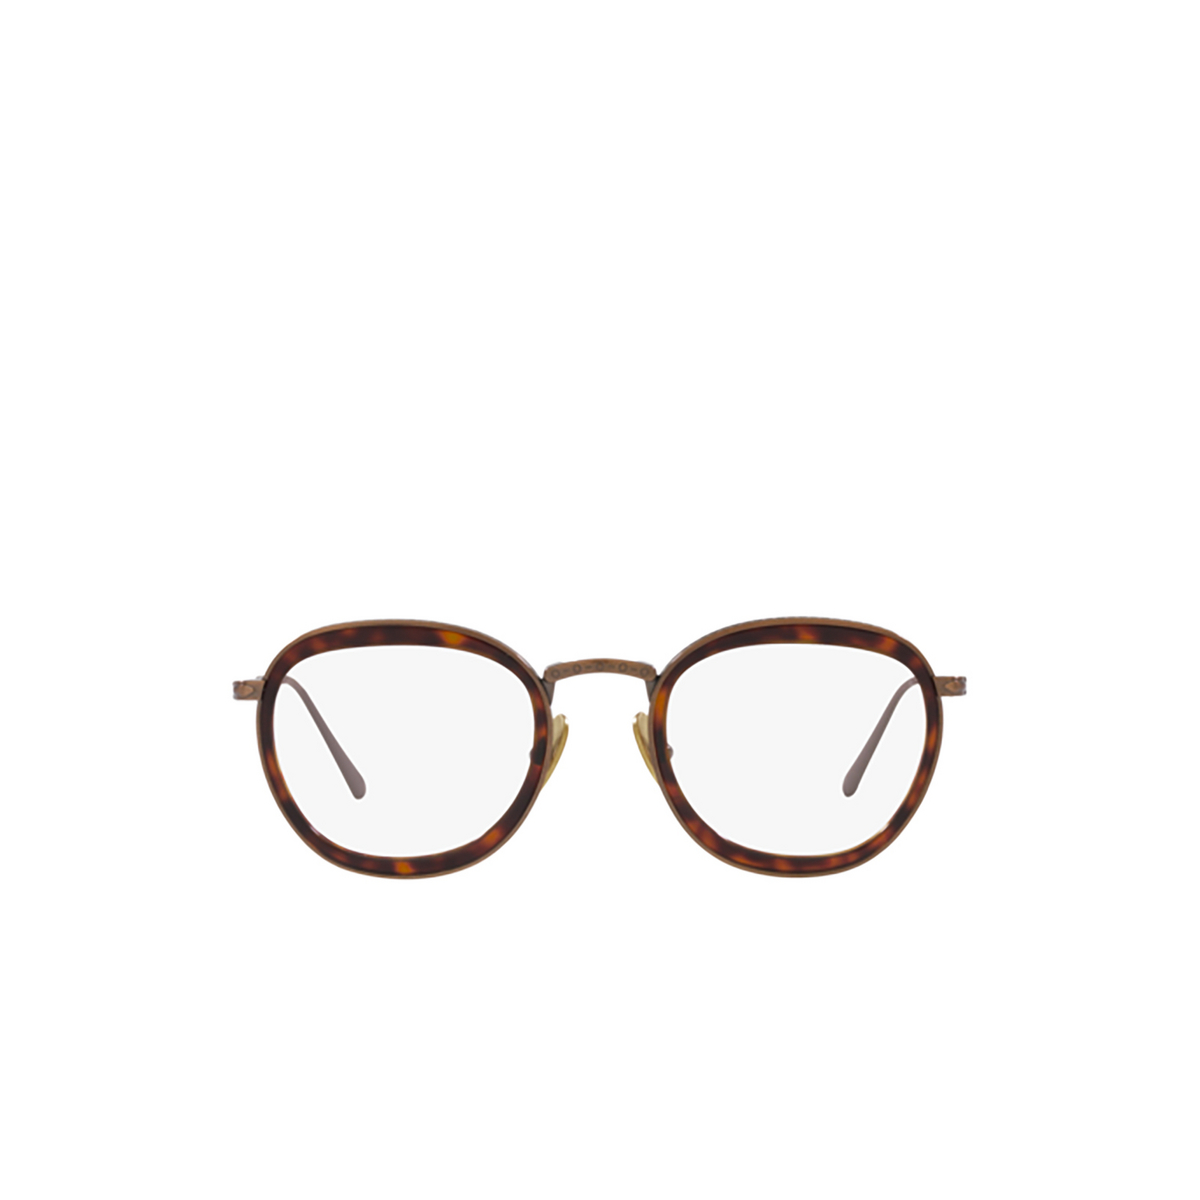 Persol PO5009VT Eyeglasses 8016 Brown - front view